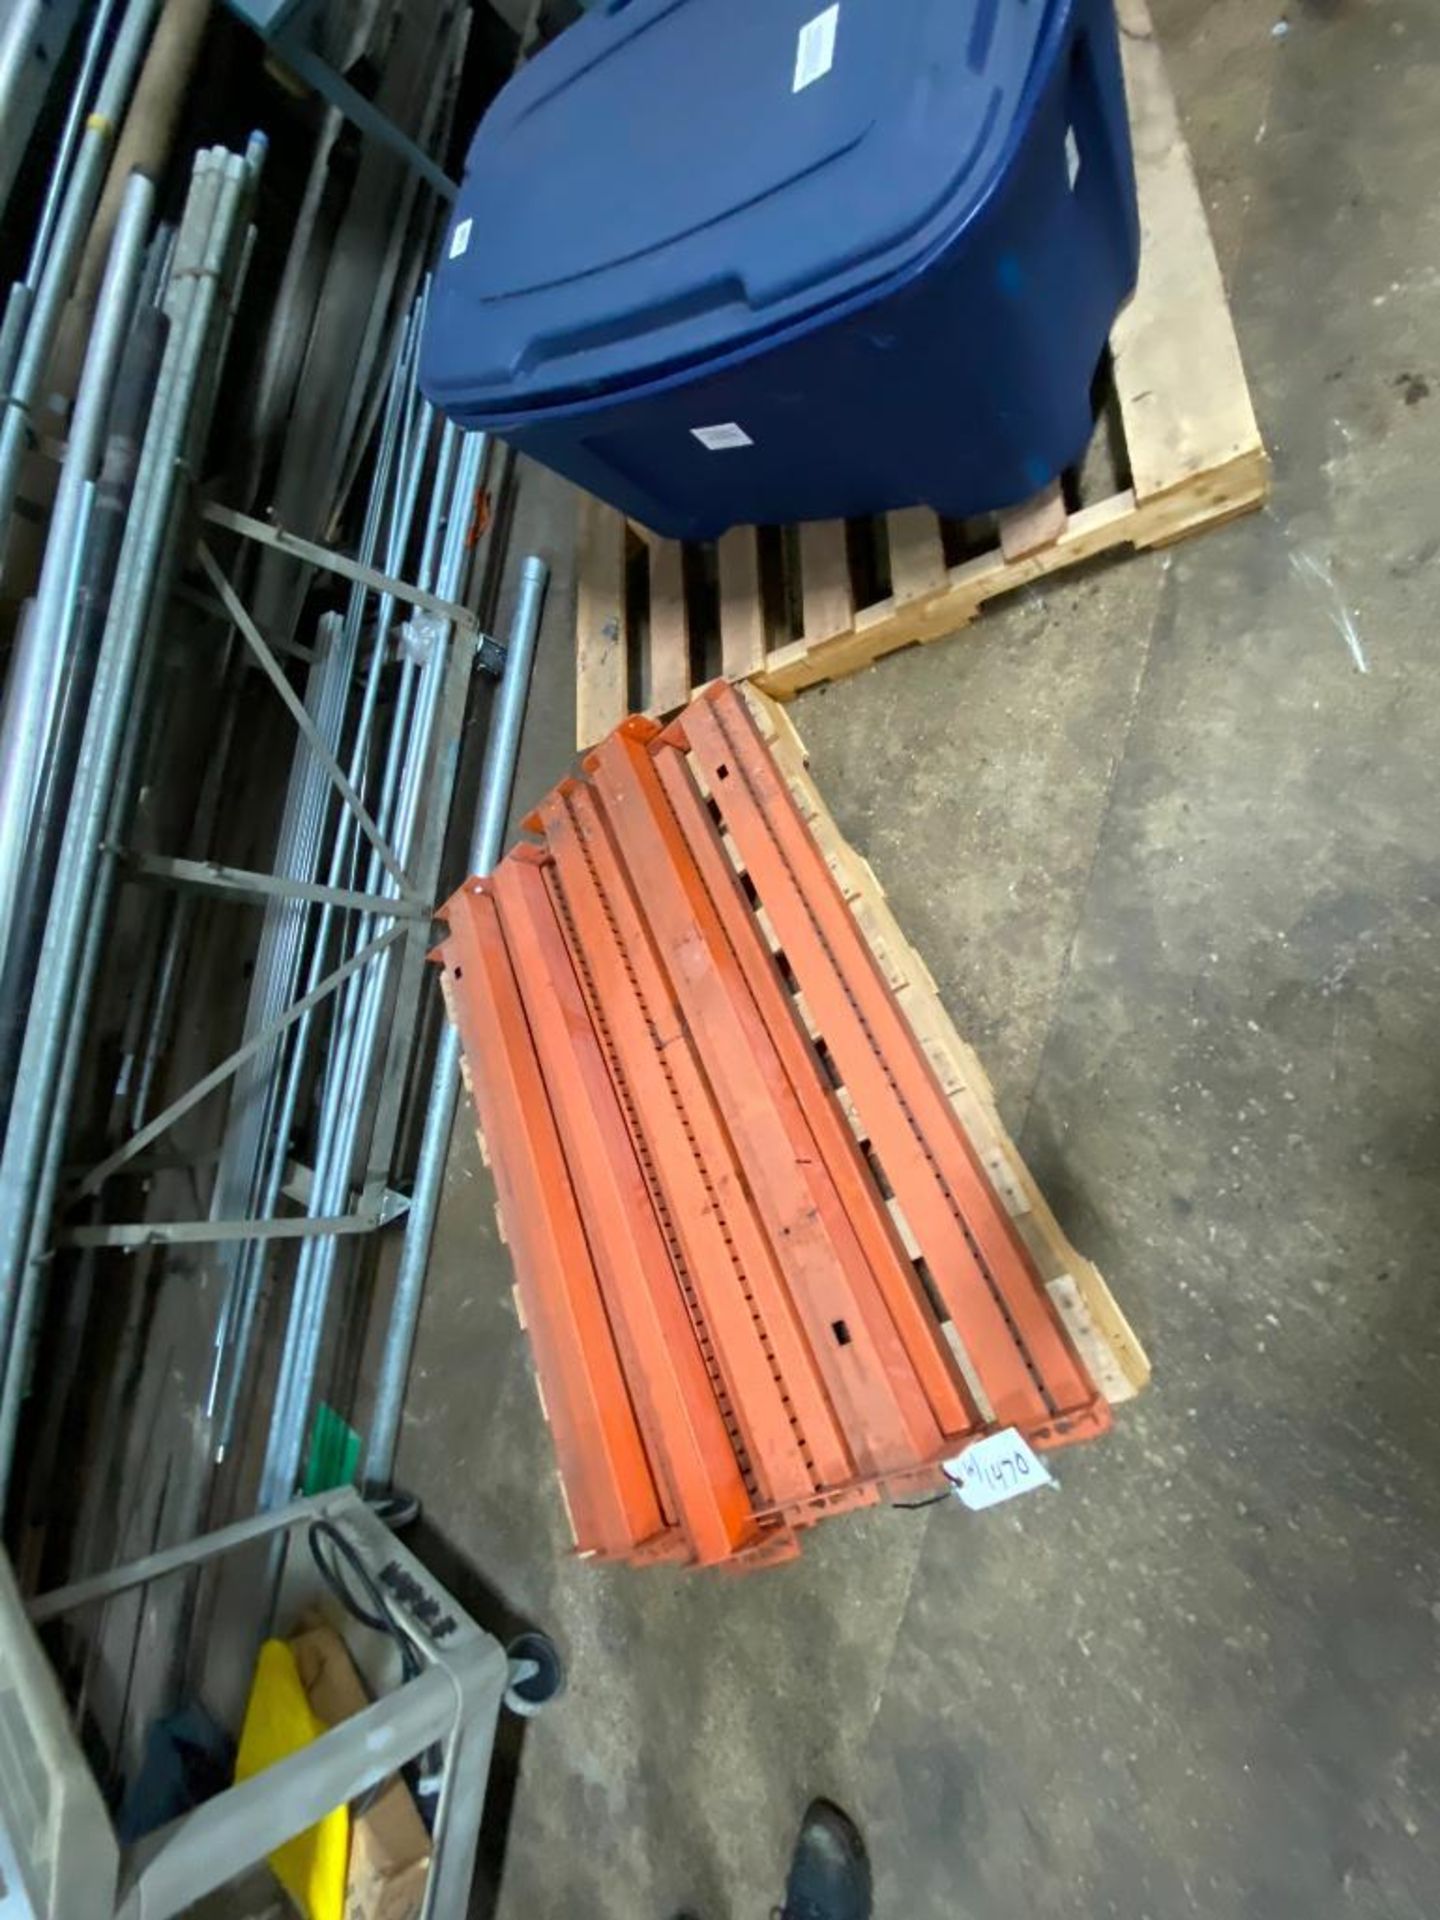 bolt together style pallet rack with contents, includes pallet of lighting, (2) shop vacuums, pallet - Image 27 of 30